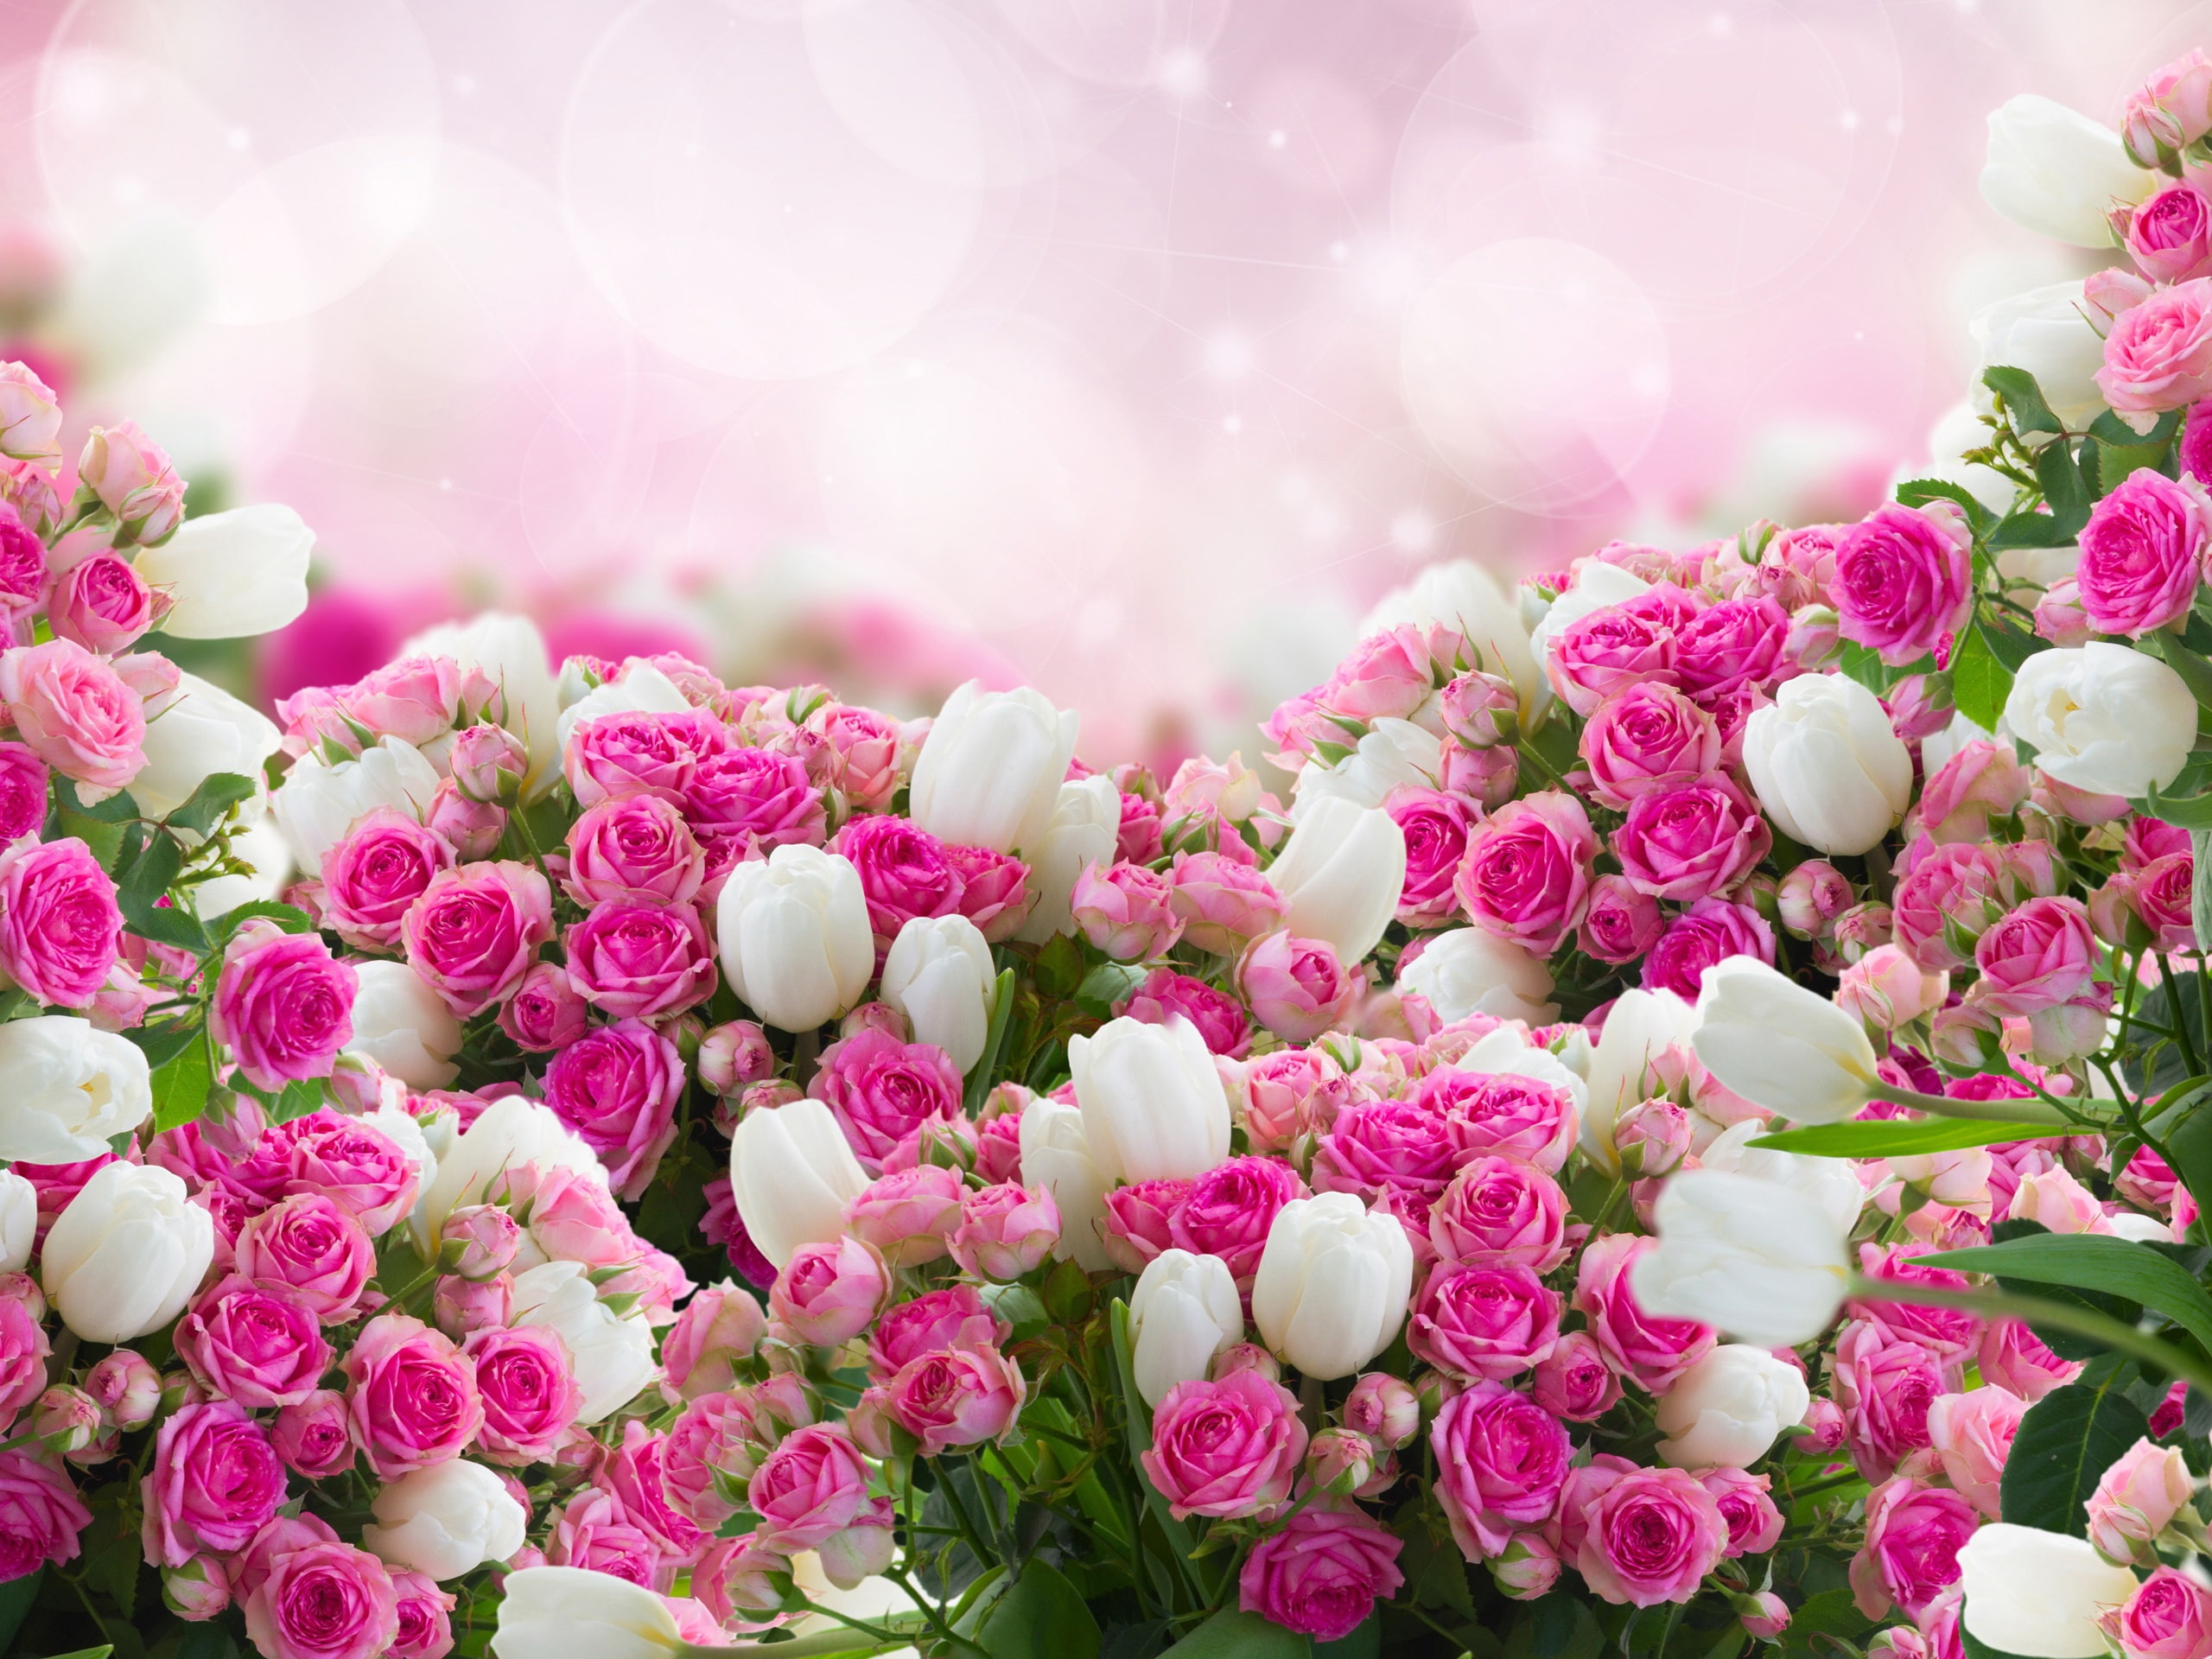 Many flowers, white tulips, pink rose